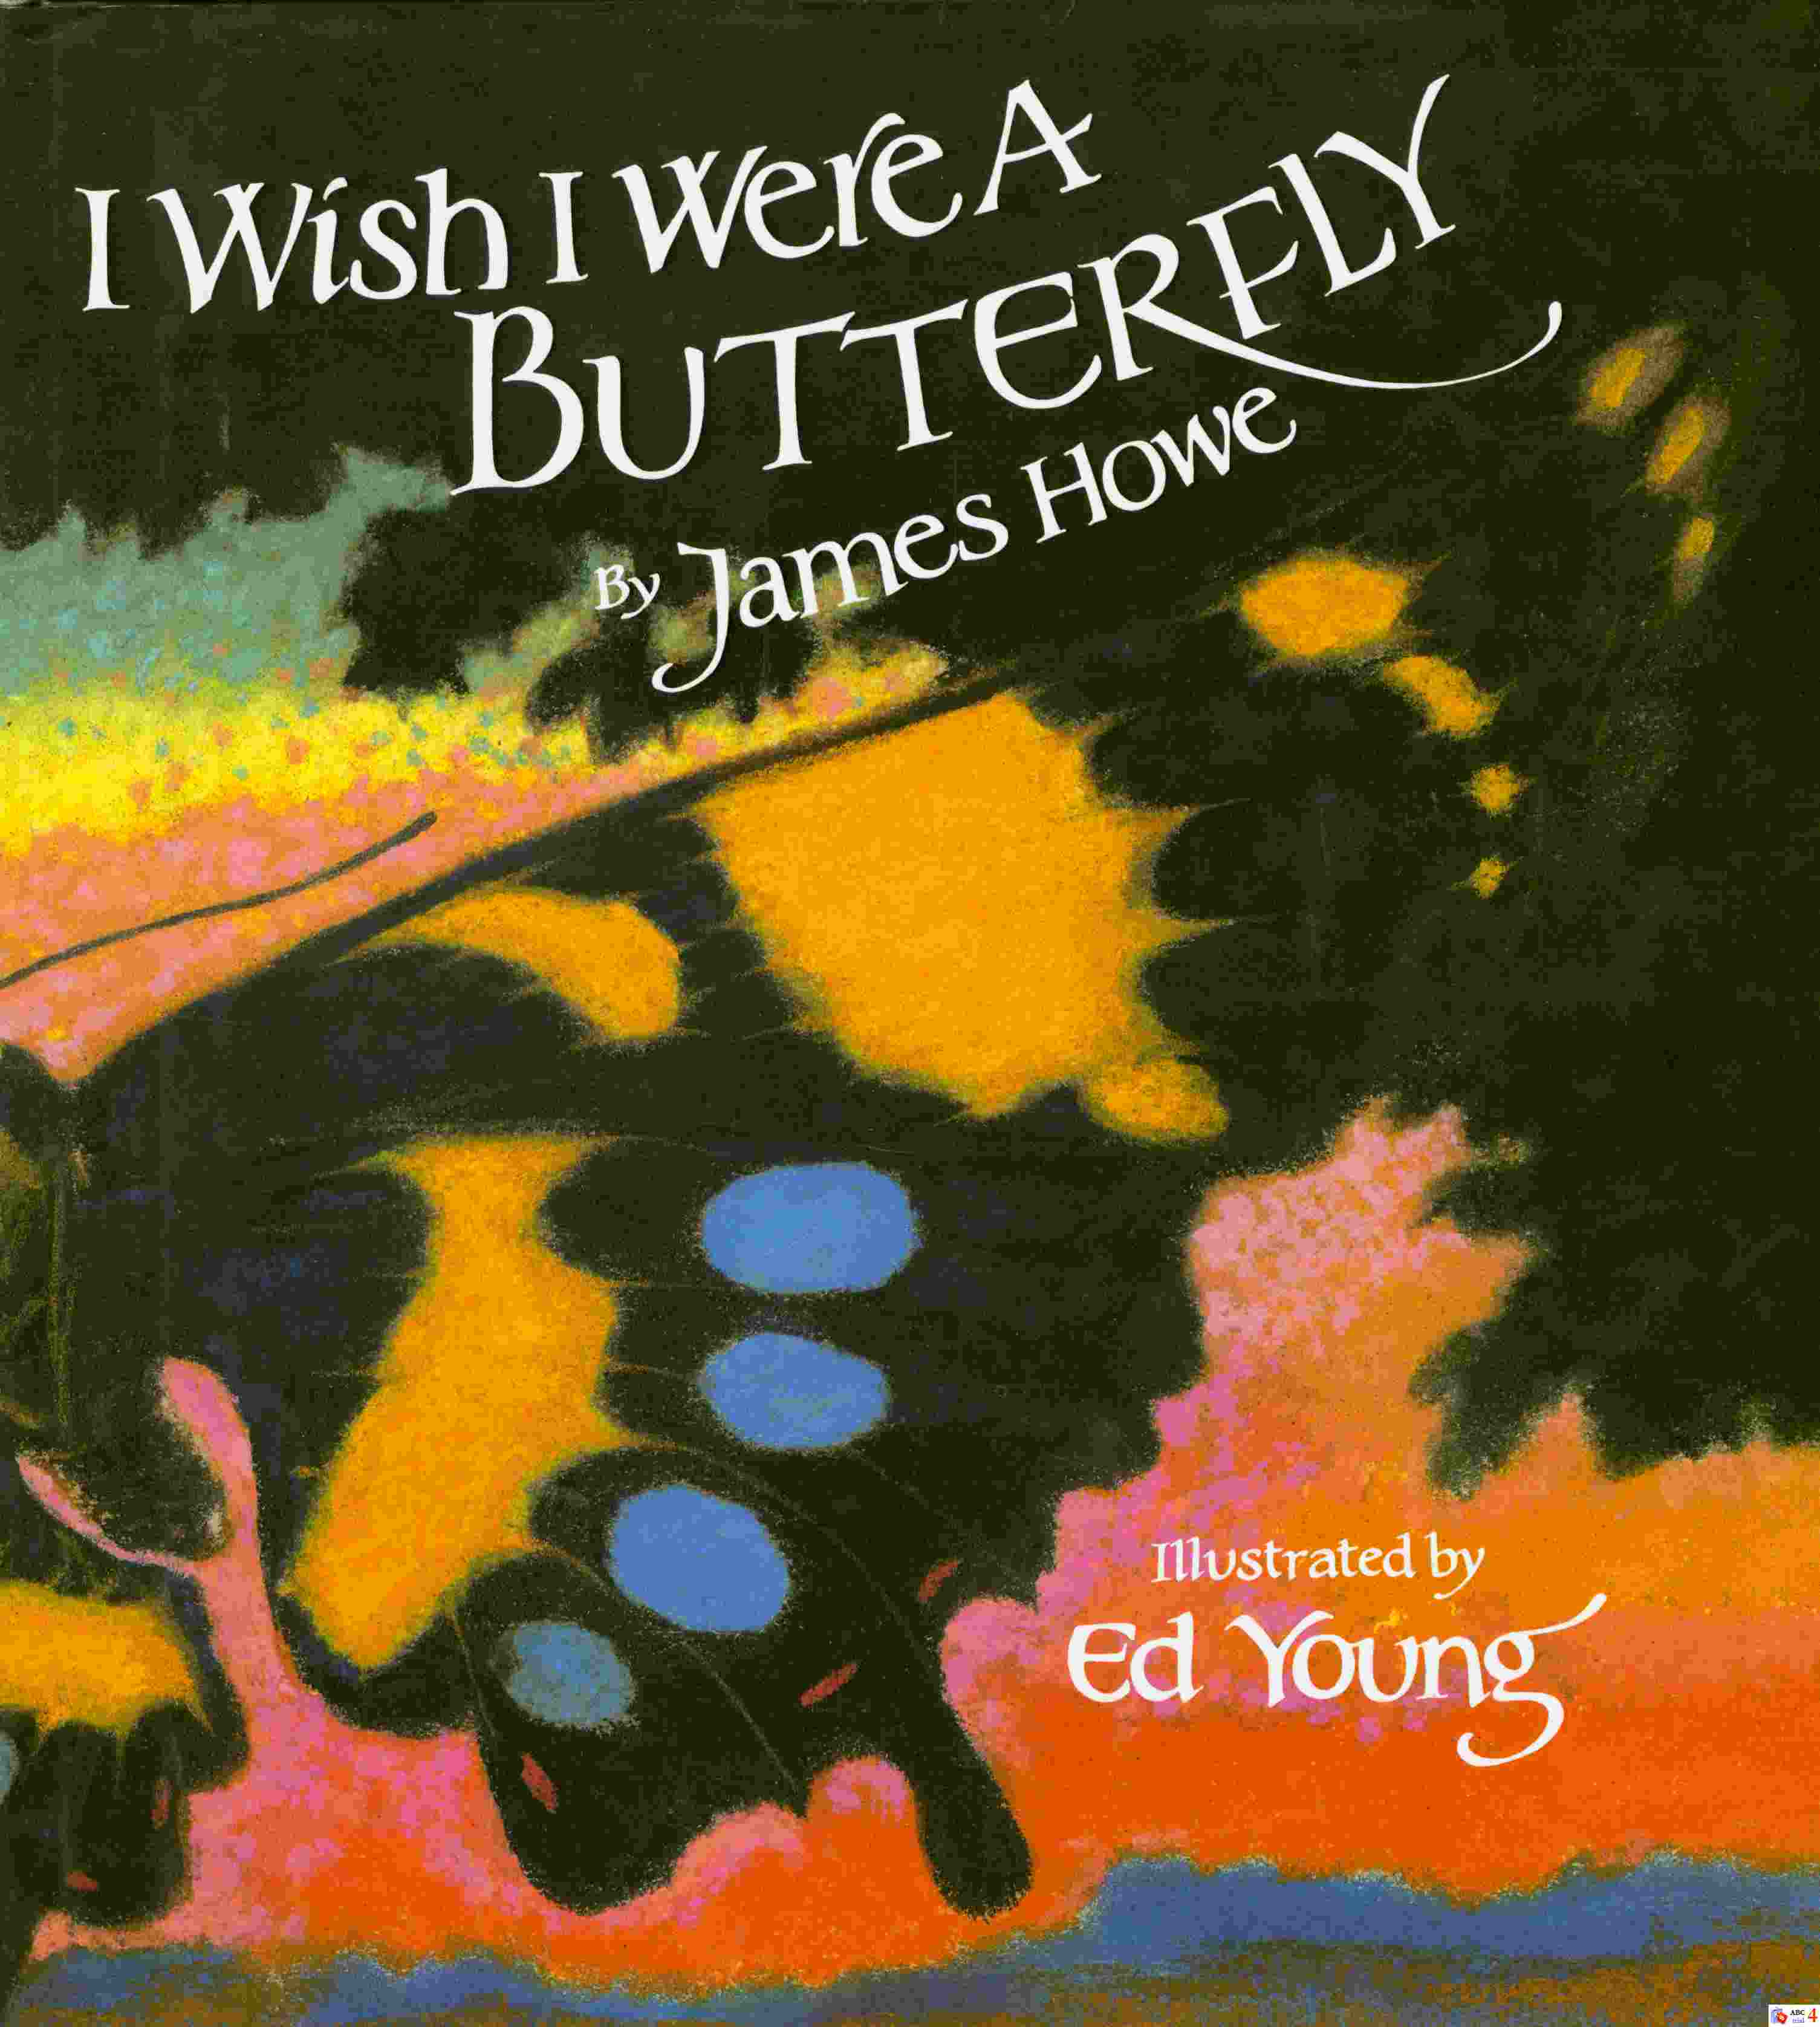 I Wish I were a butterfly 書封